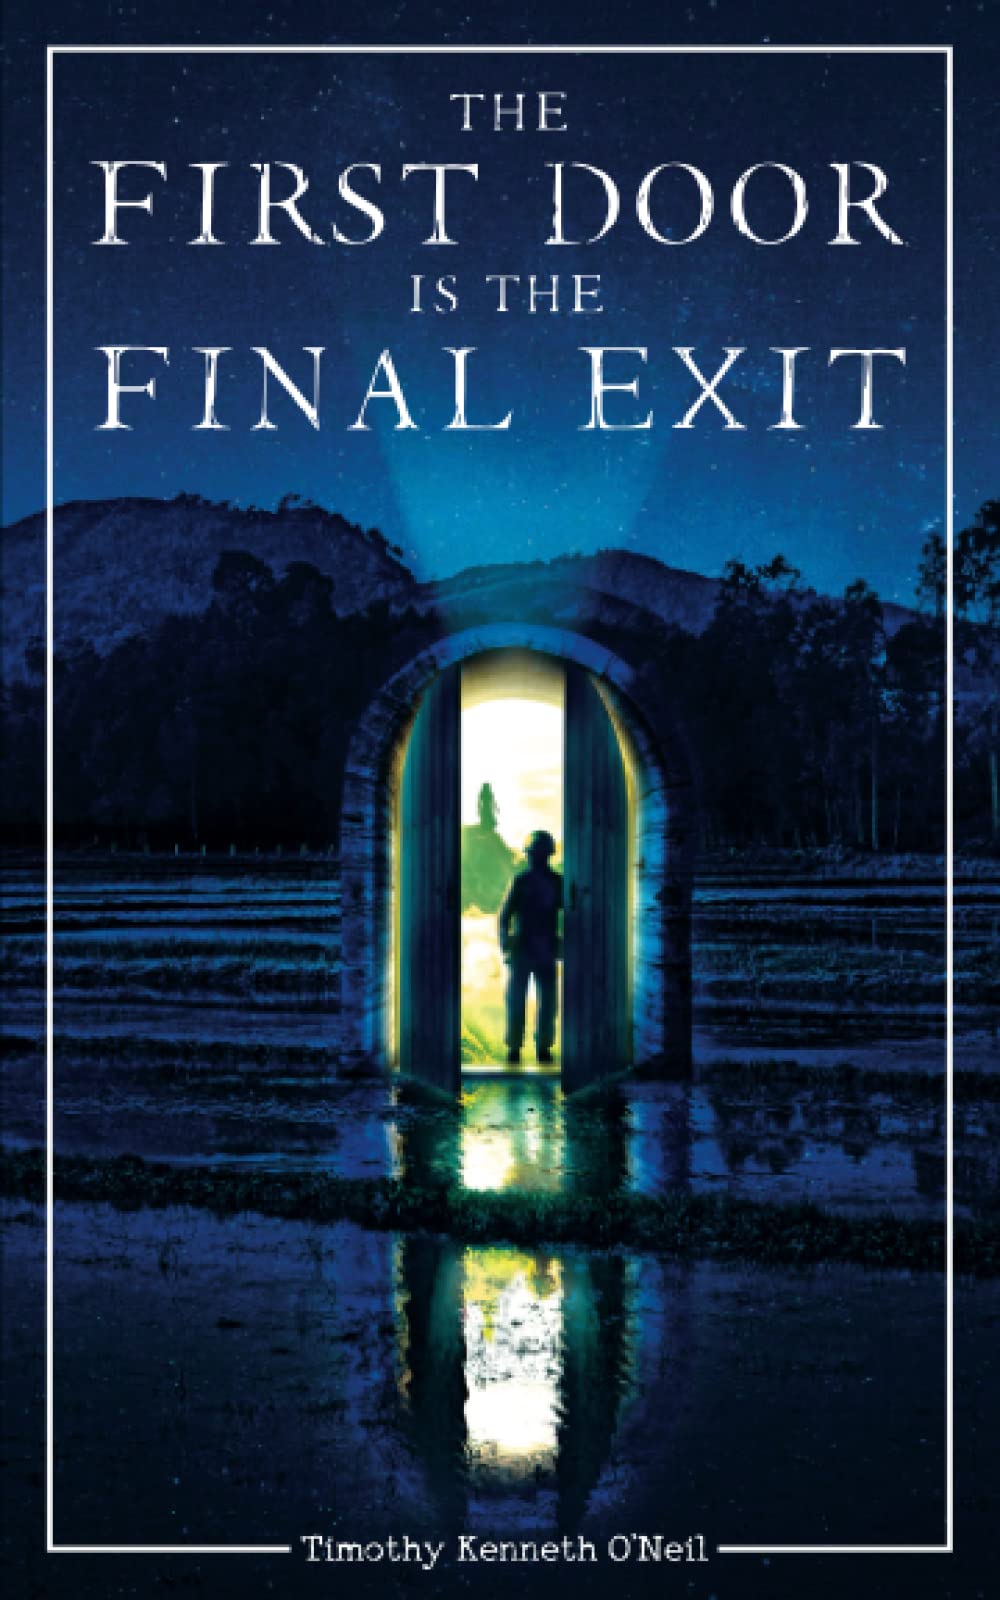 The First Door Is the Final Exit by Timothy Kenneth O'Neil